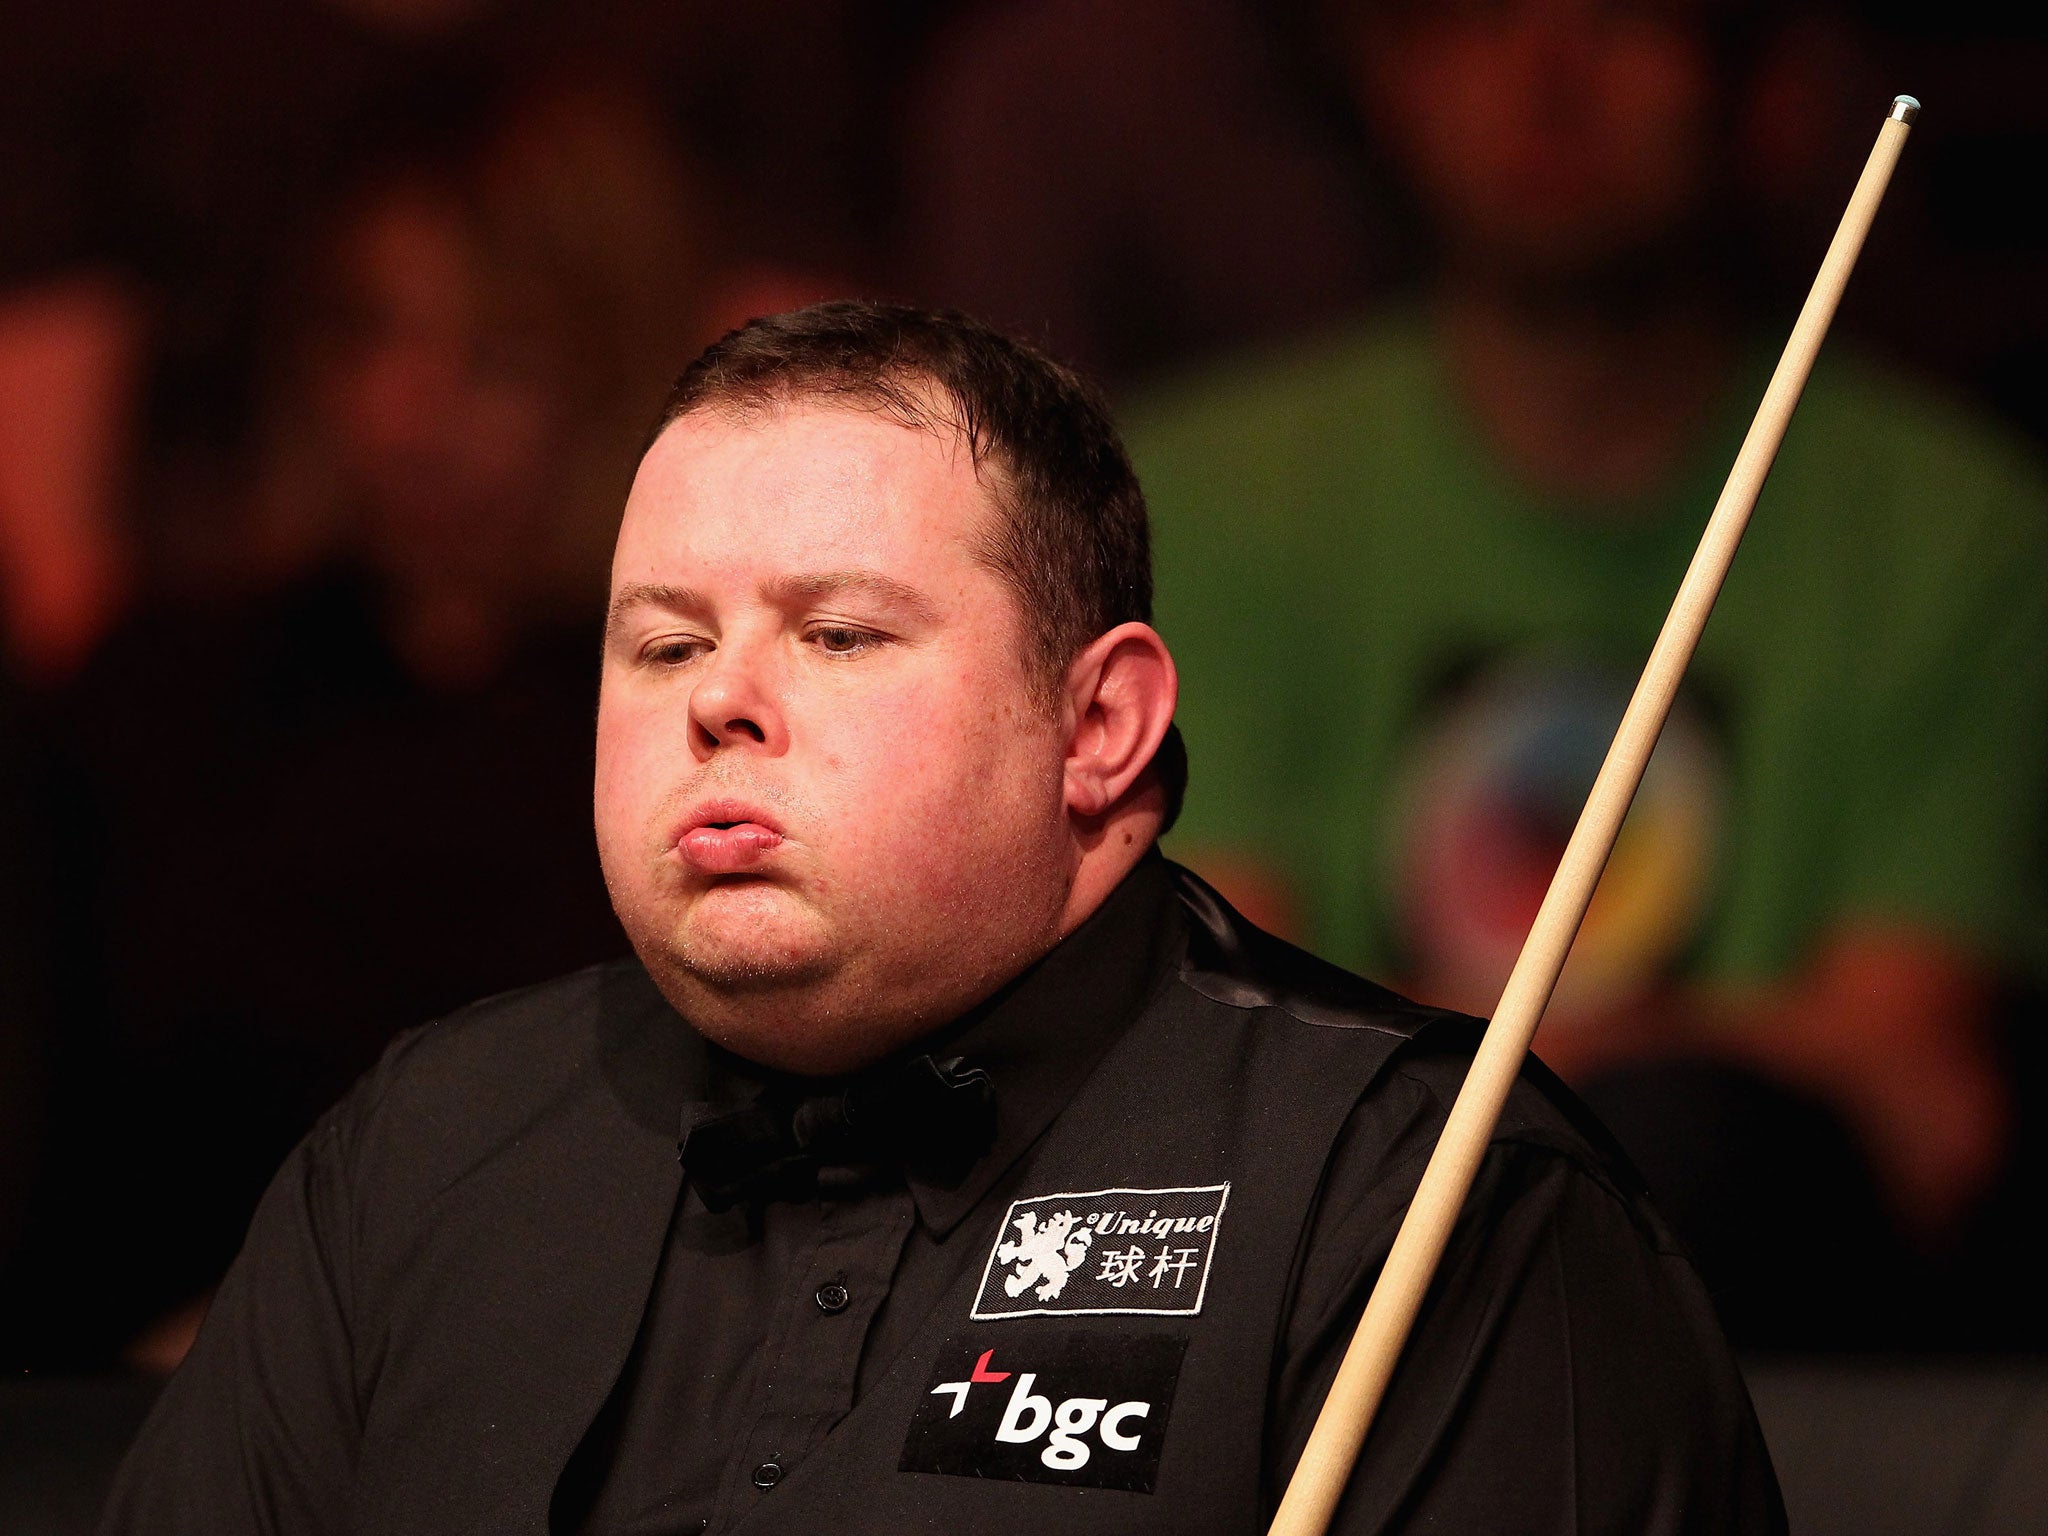 Stephen Lee denies all charges of match fixing and betting breaches